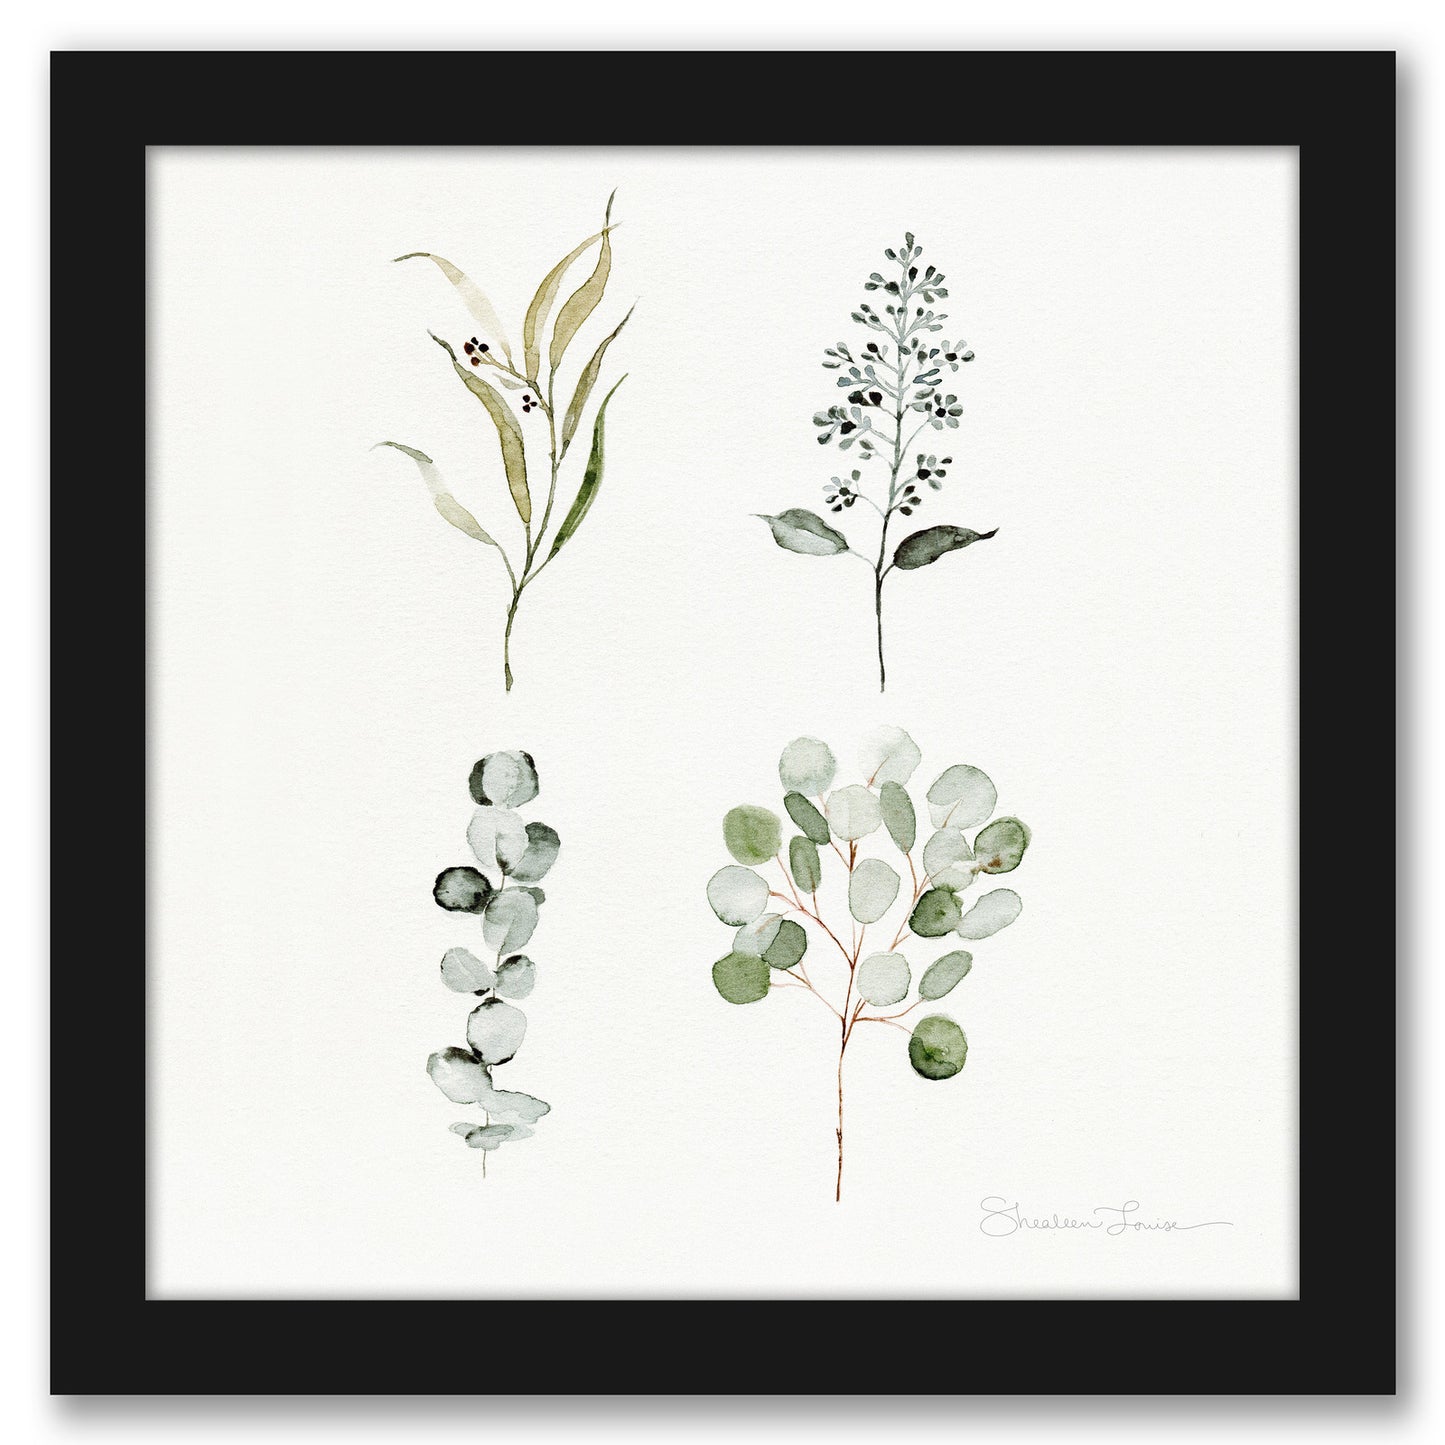 Eucalyptus Pieces by Shealeen Louise - Framed Print